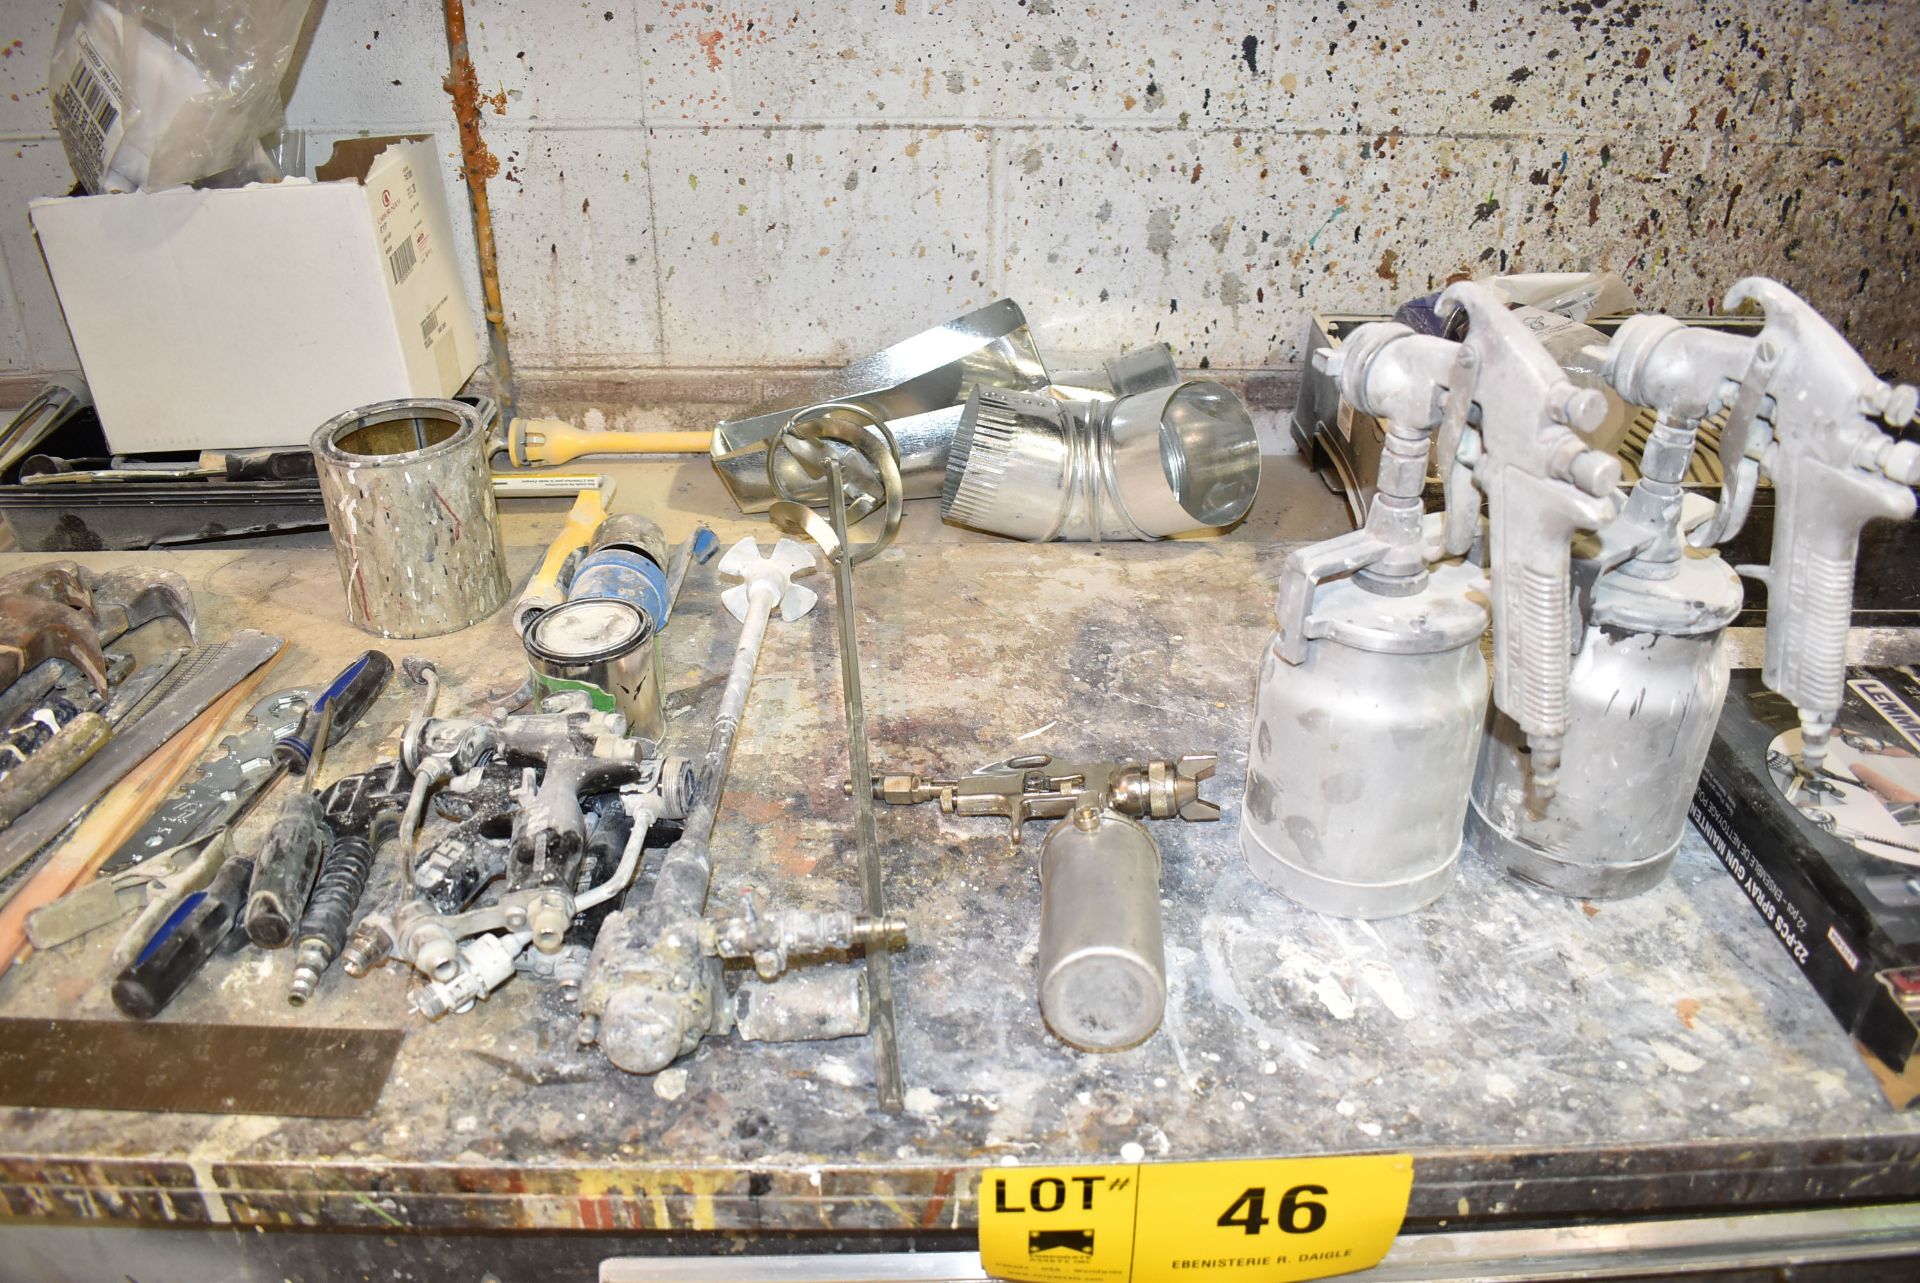 LOT/ WORKBENCH WITH CONTENTS CONSISTING OF PAINT MIXERS, PNEUMATIC SPRAY GUNS, HARDWARE AND SUPPLIES - Image 2 of 5